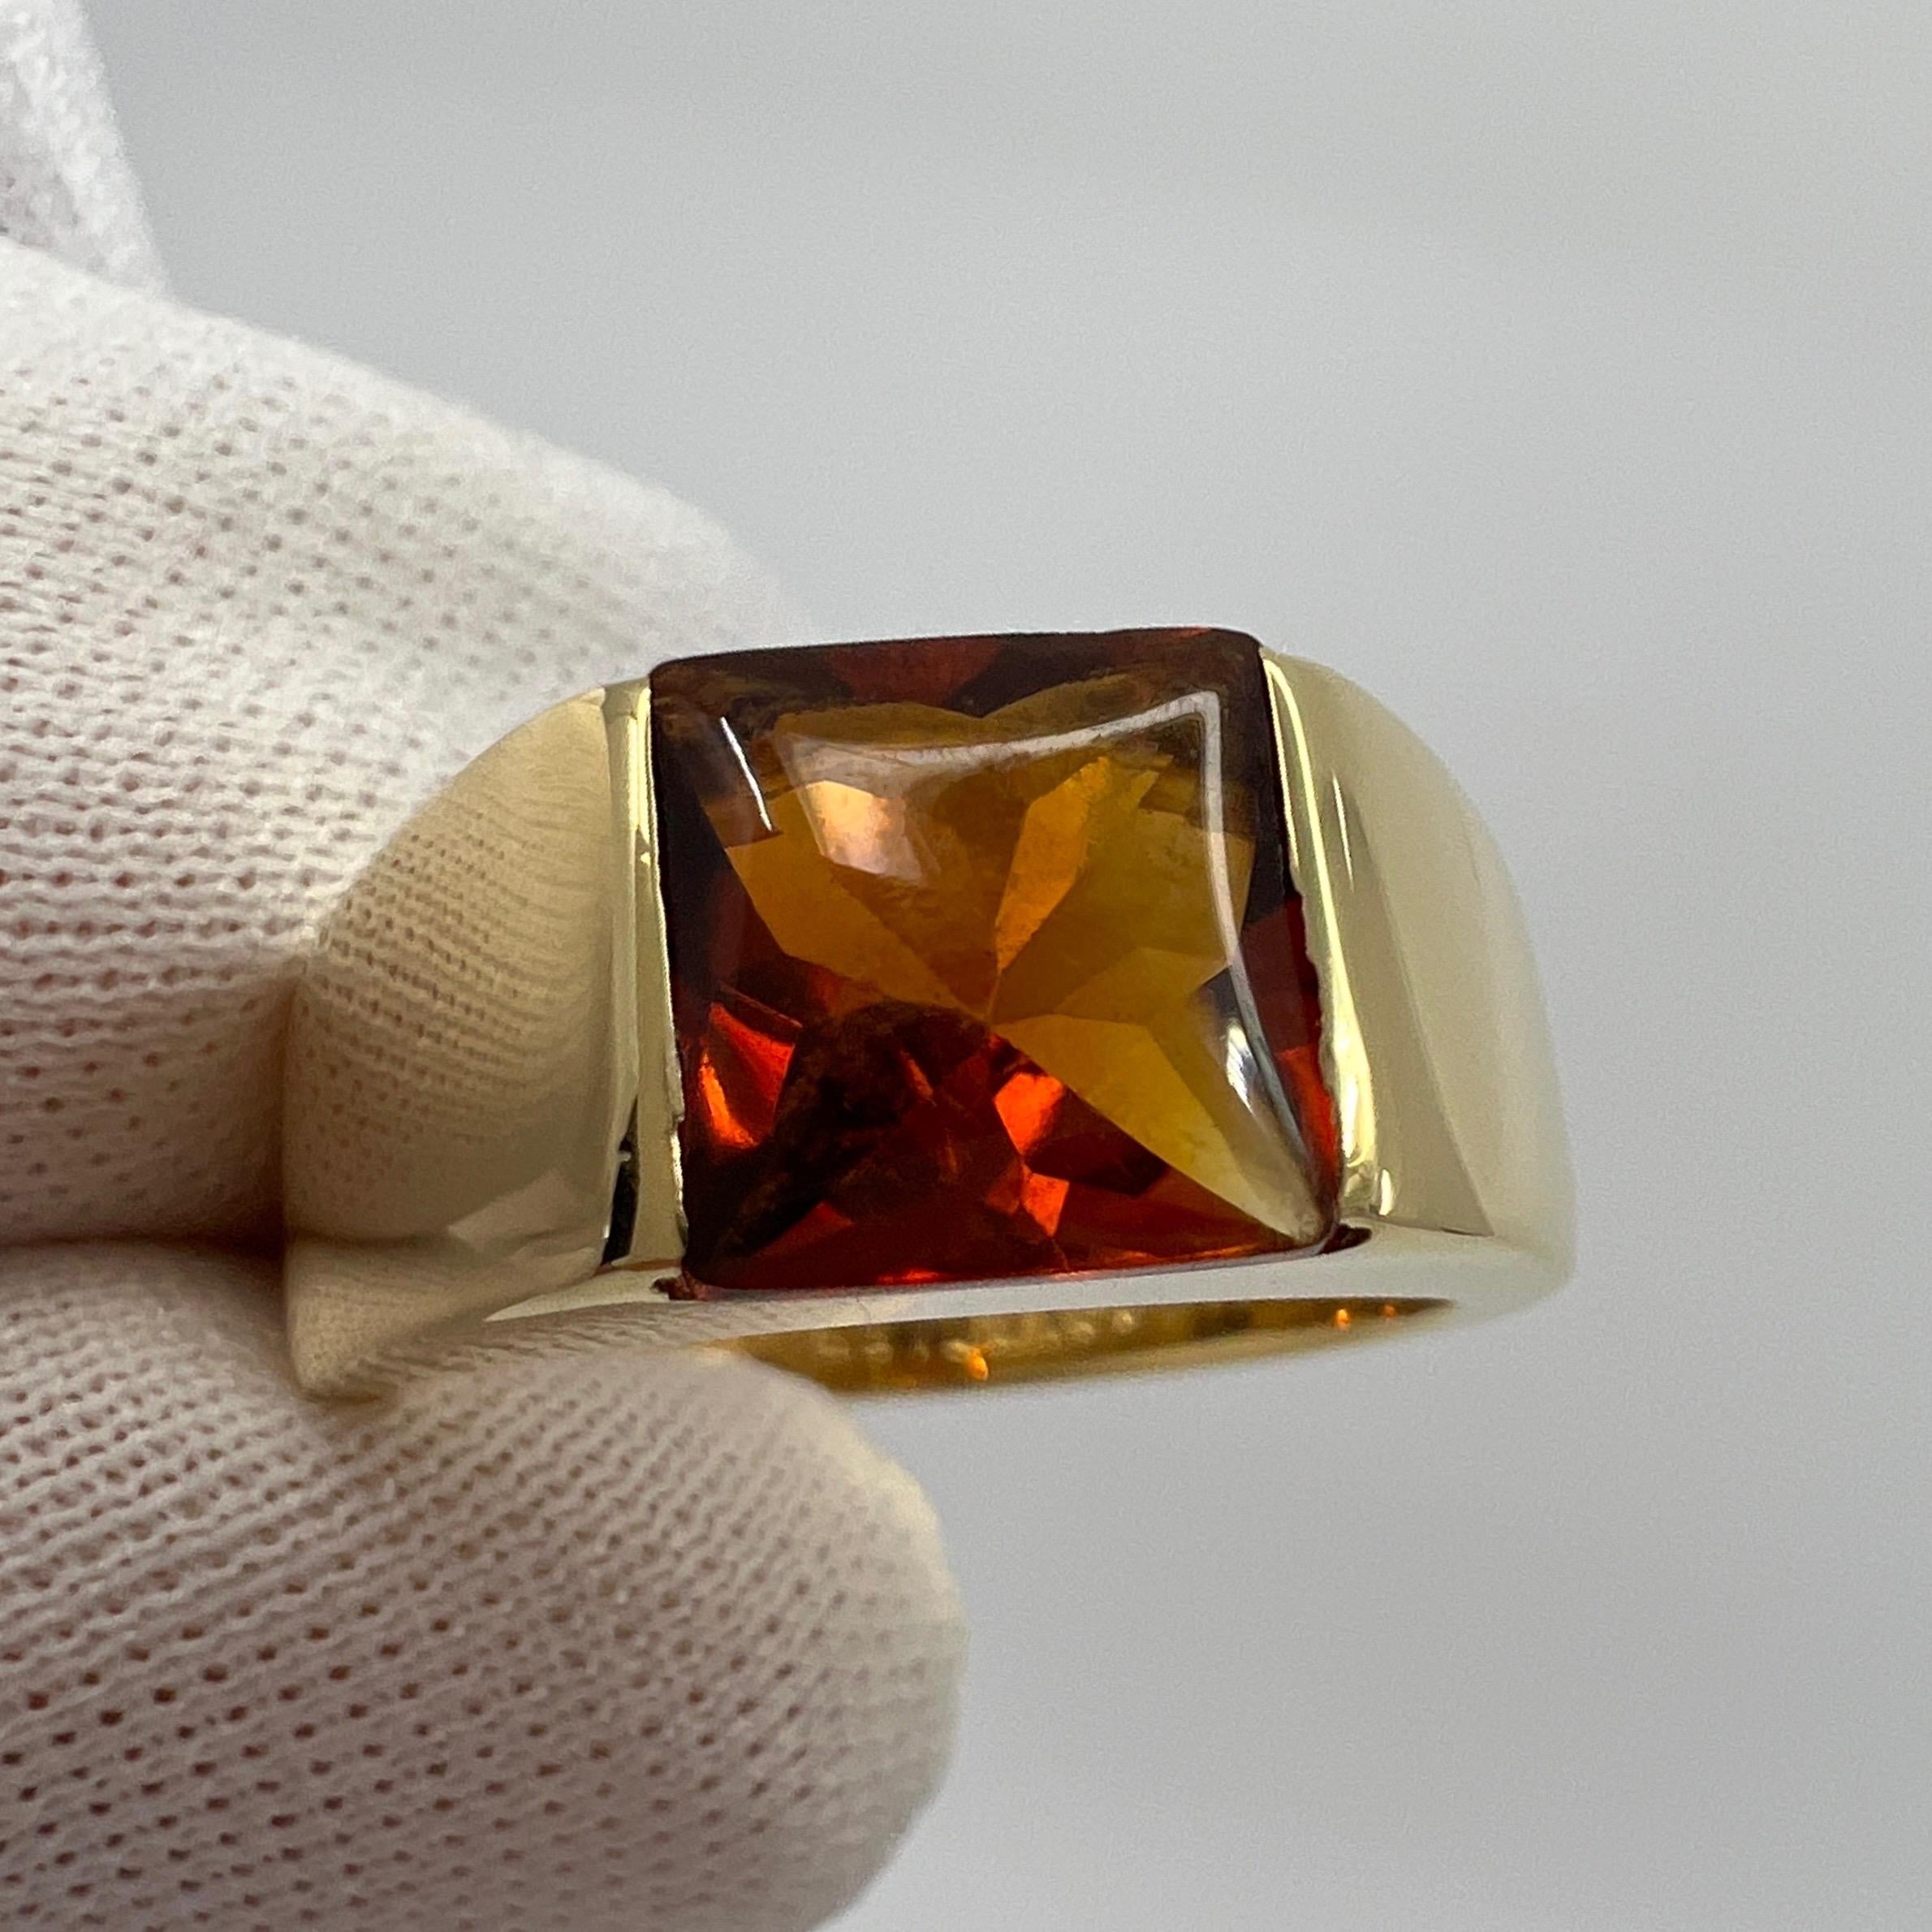 Vintage Cartier Deep Yellow Orange Citrine 18k Yellow Gold Tank Ring.

Stunning yellow gold ring with an 8mm tension set deep orange citrine. Fine jewellery houses like Cartier only use the finest of gemstones and this citrine is no exception. A top